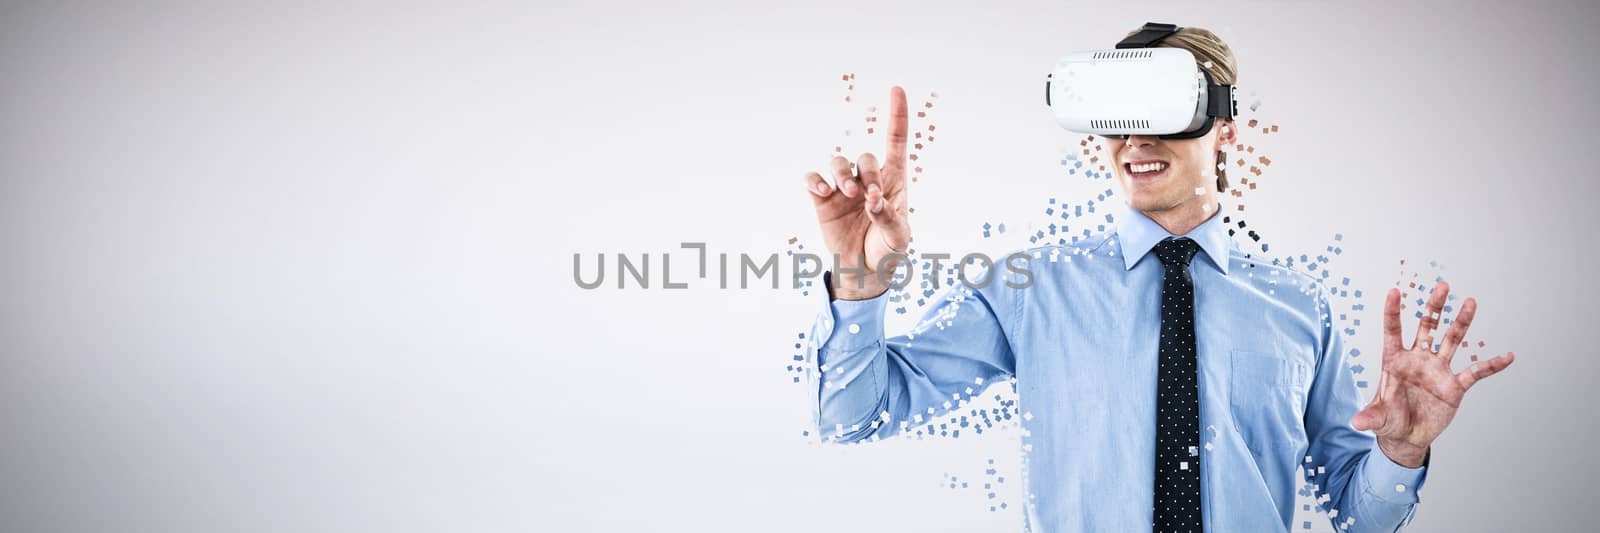 Happy young businessman gesturing while wearing futuristic glasses against grey background